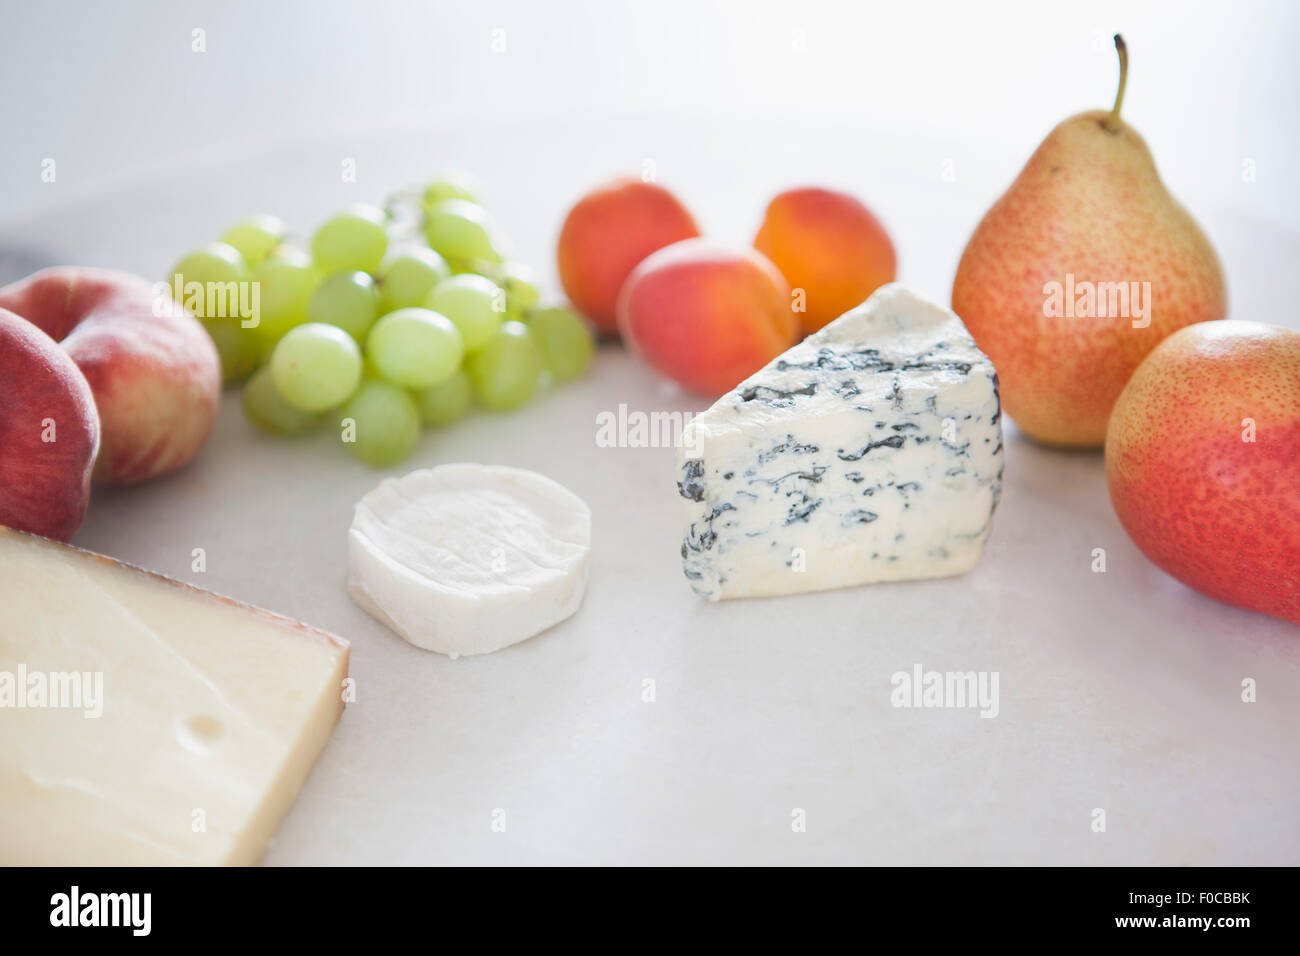 Fruits and cheese in plate against white background Stock Photo